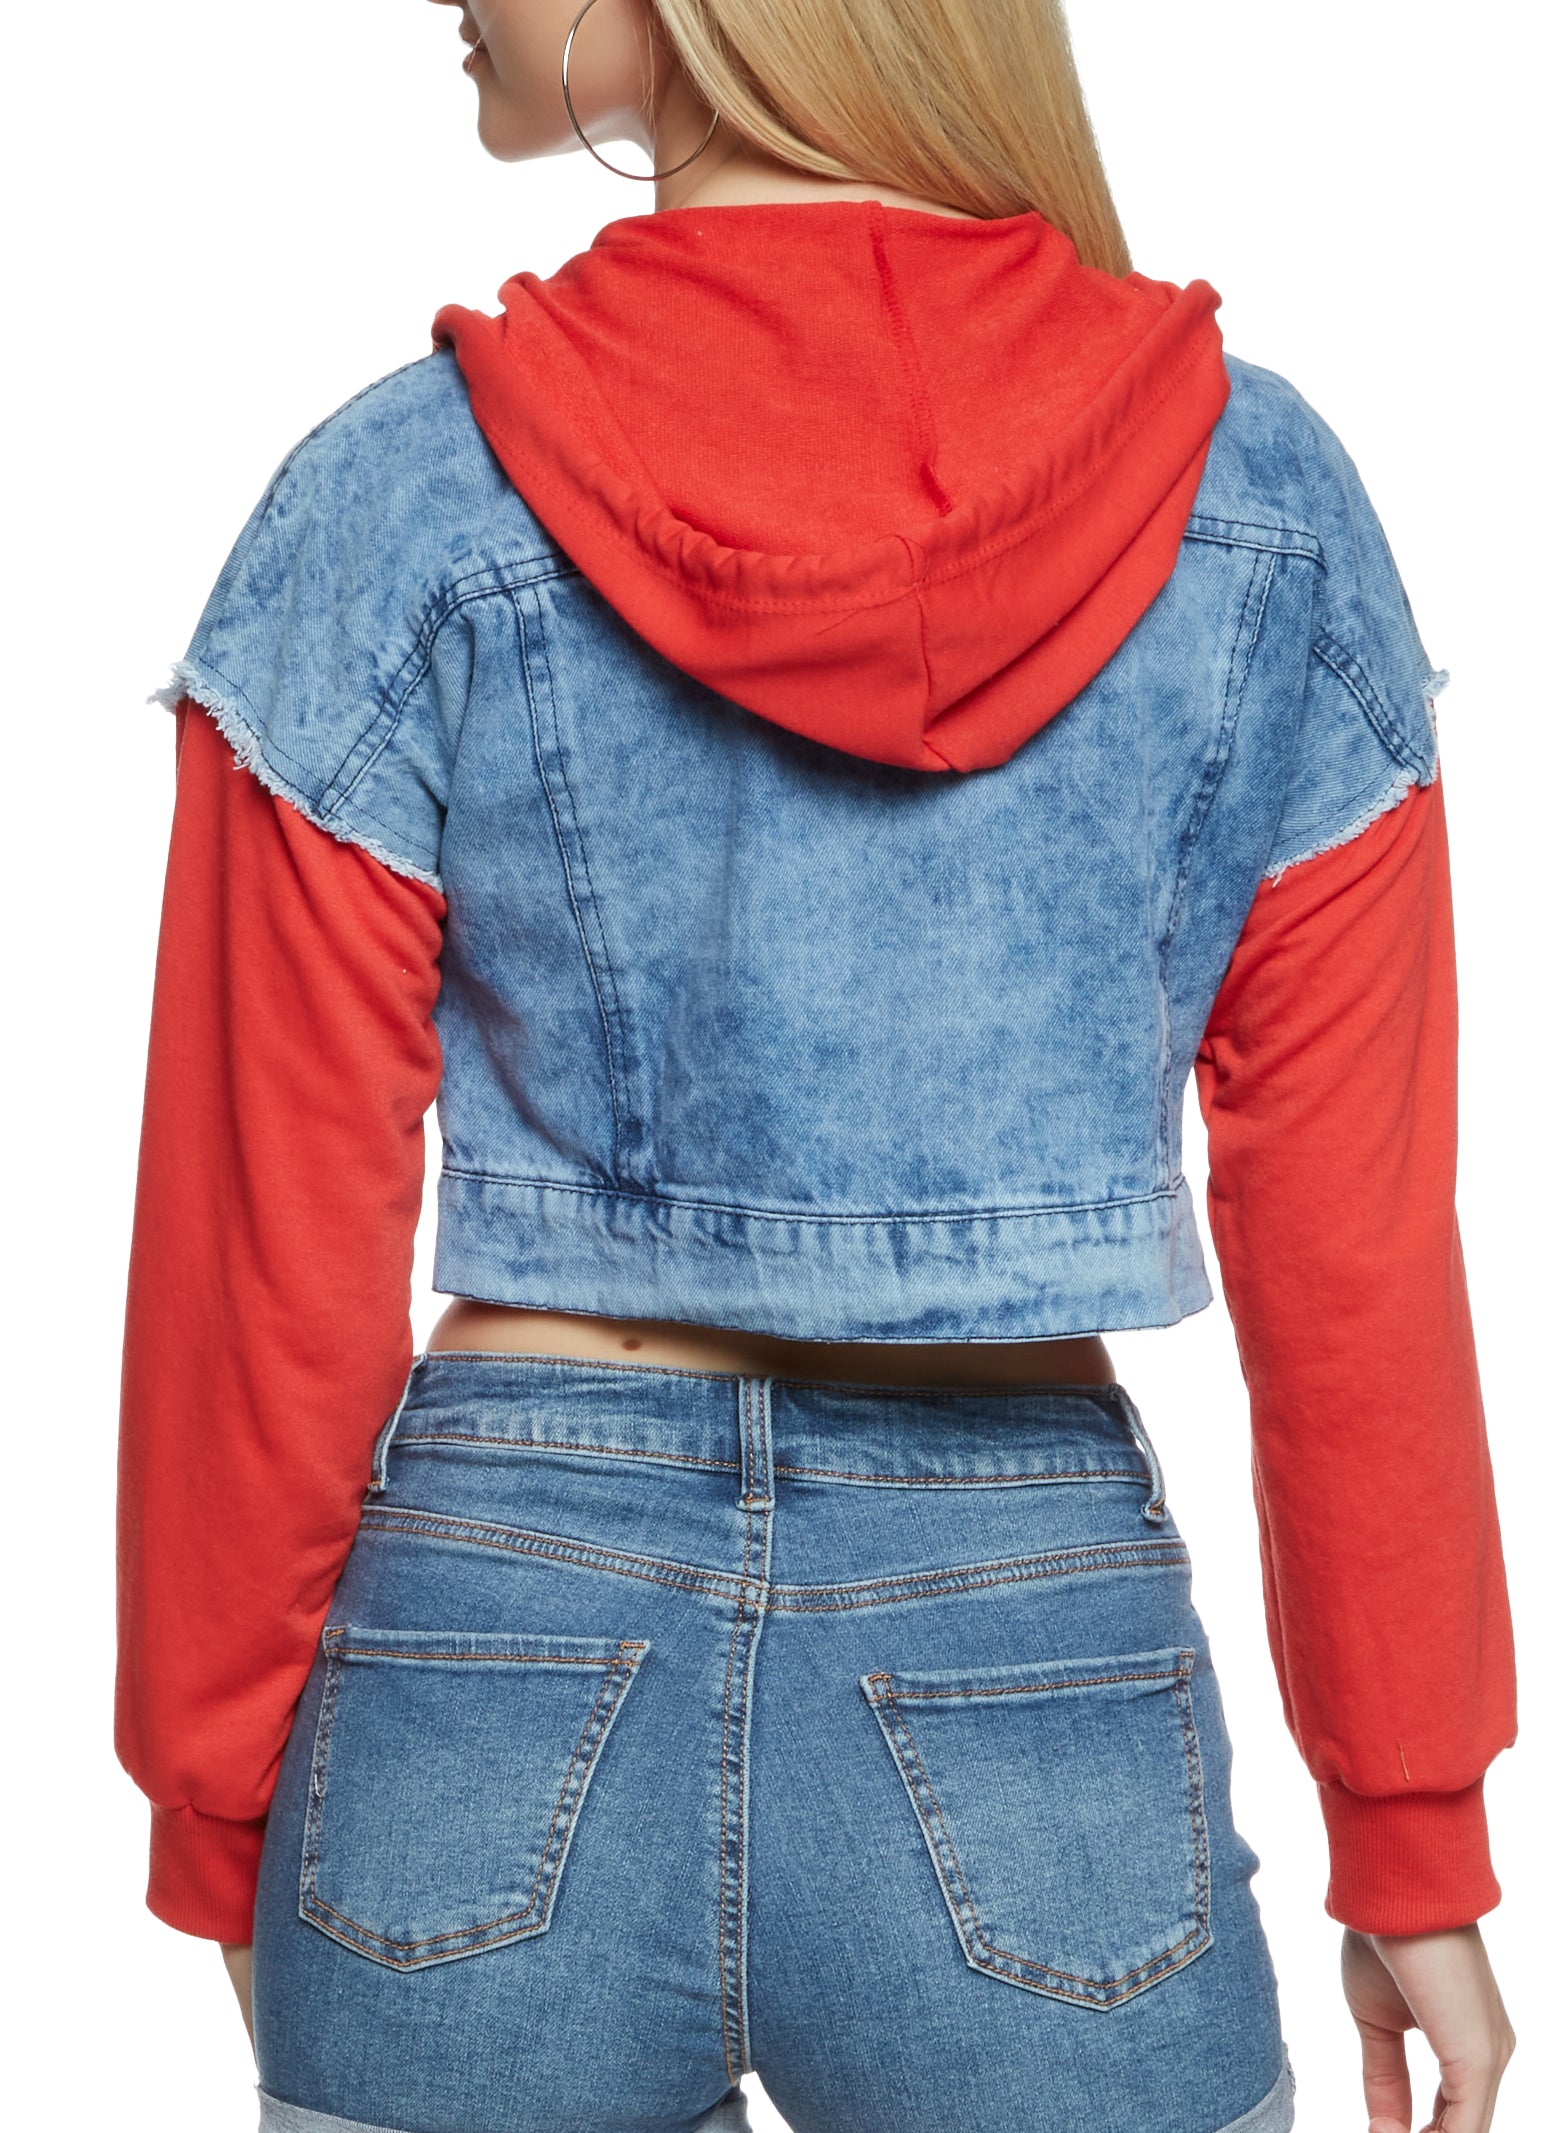 Women's Red Denim Jacket, White and Black Print Crew-neck T-shirt, Blue  Denim Wide Leg Pants, White Leather Oxford Shoes | Lookastic